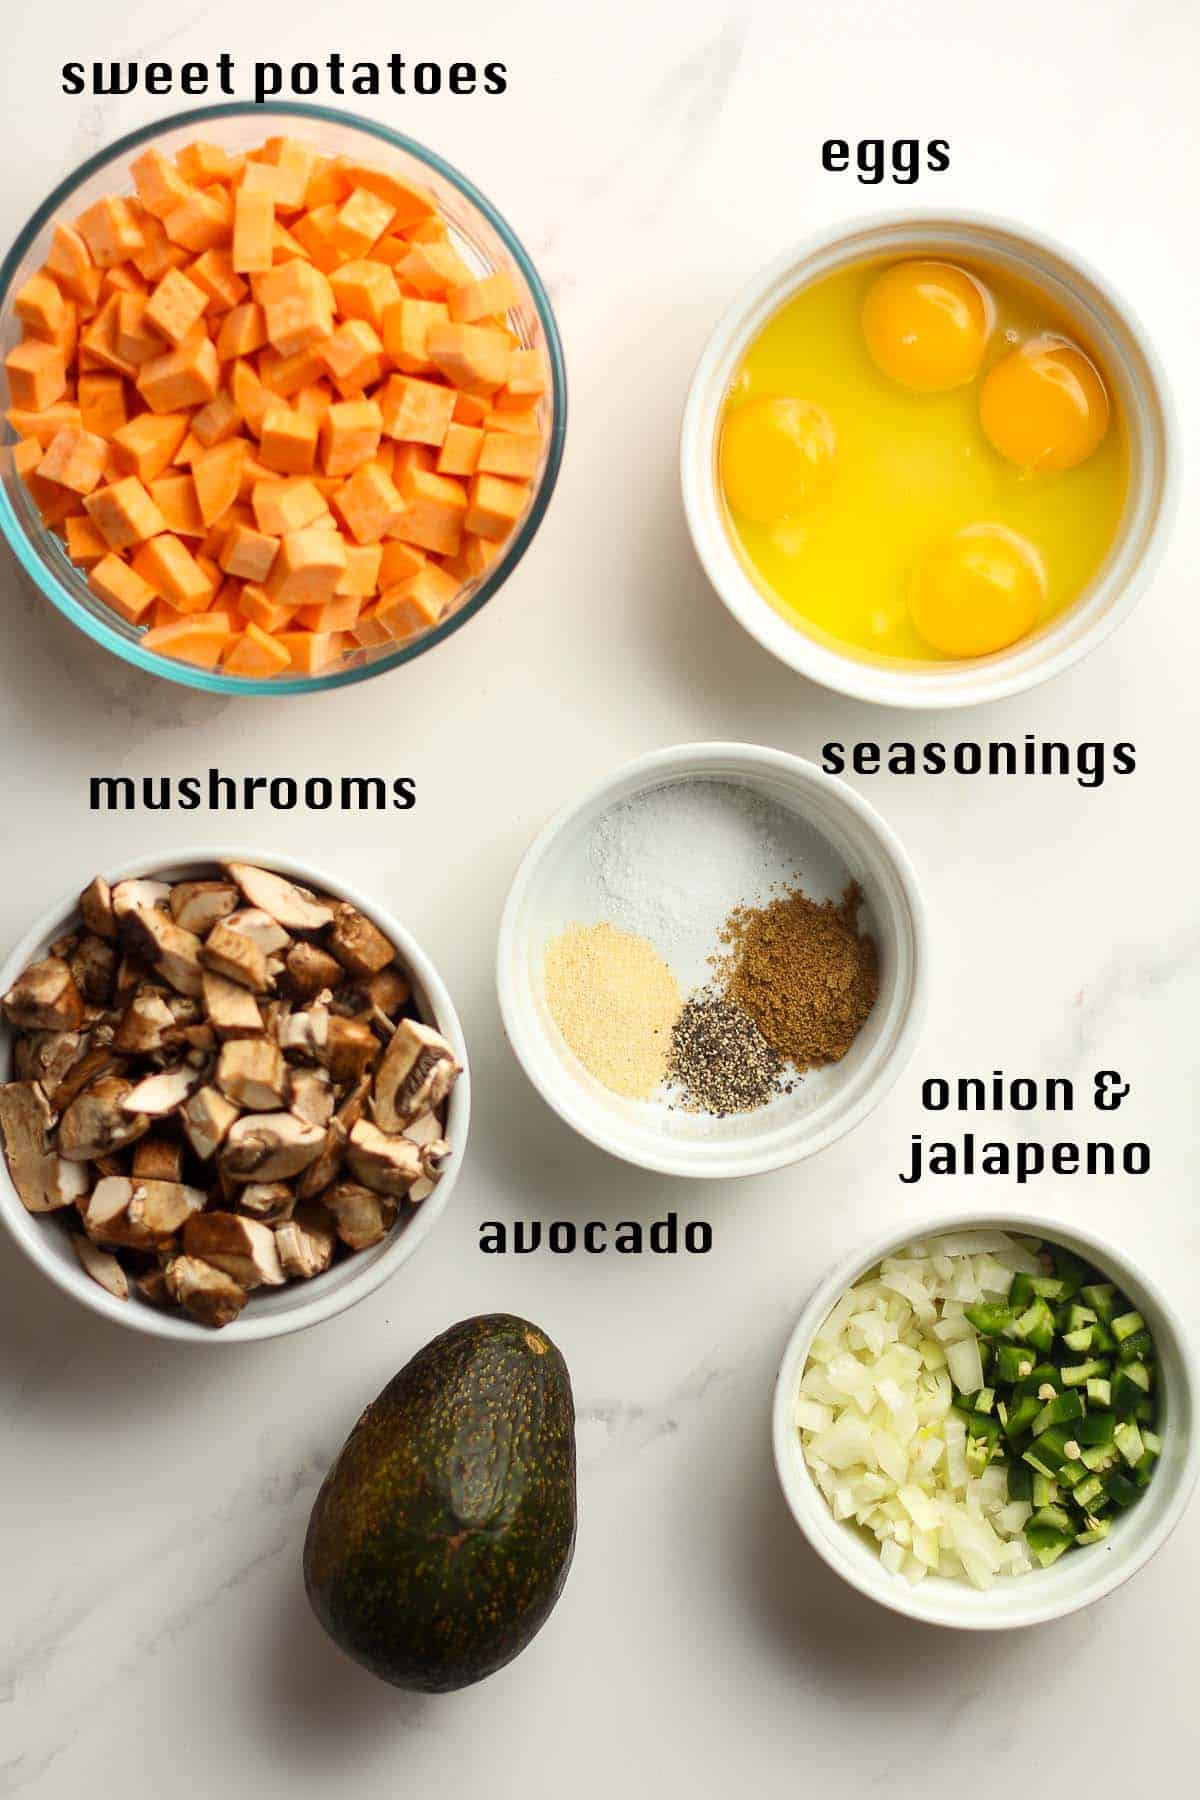 The labeled ingredients for the breakfast skillet.